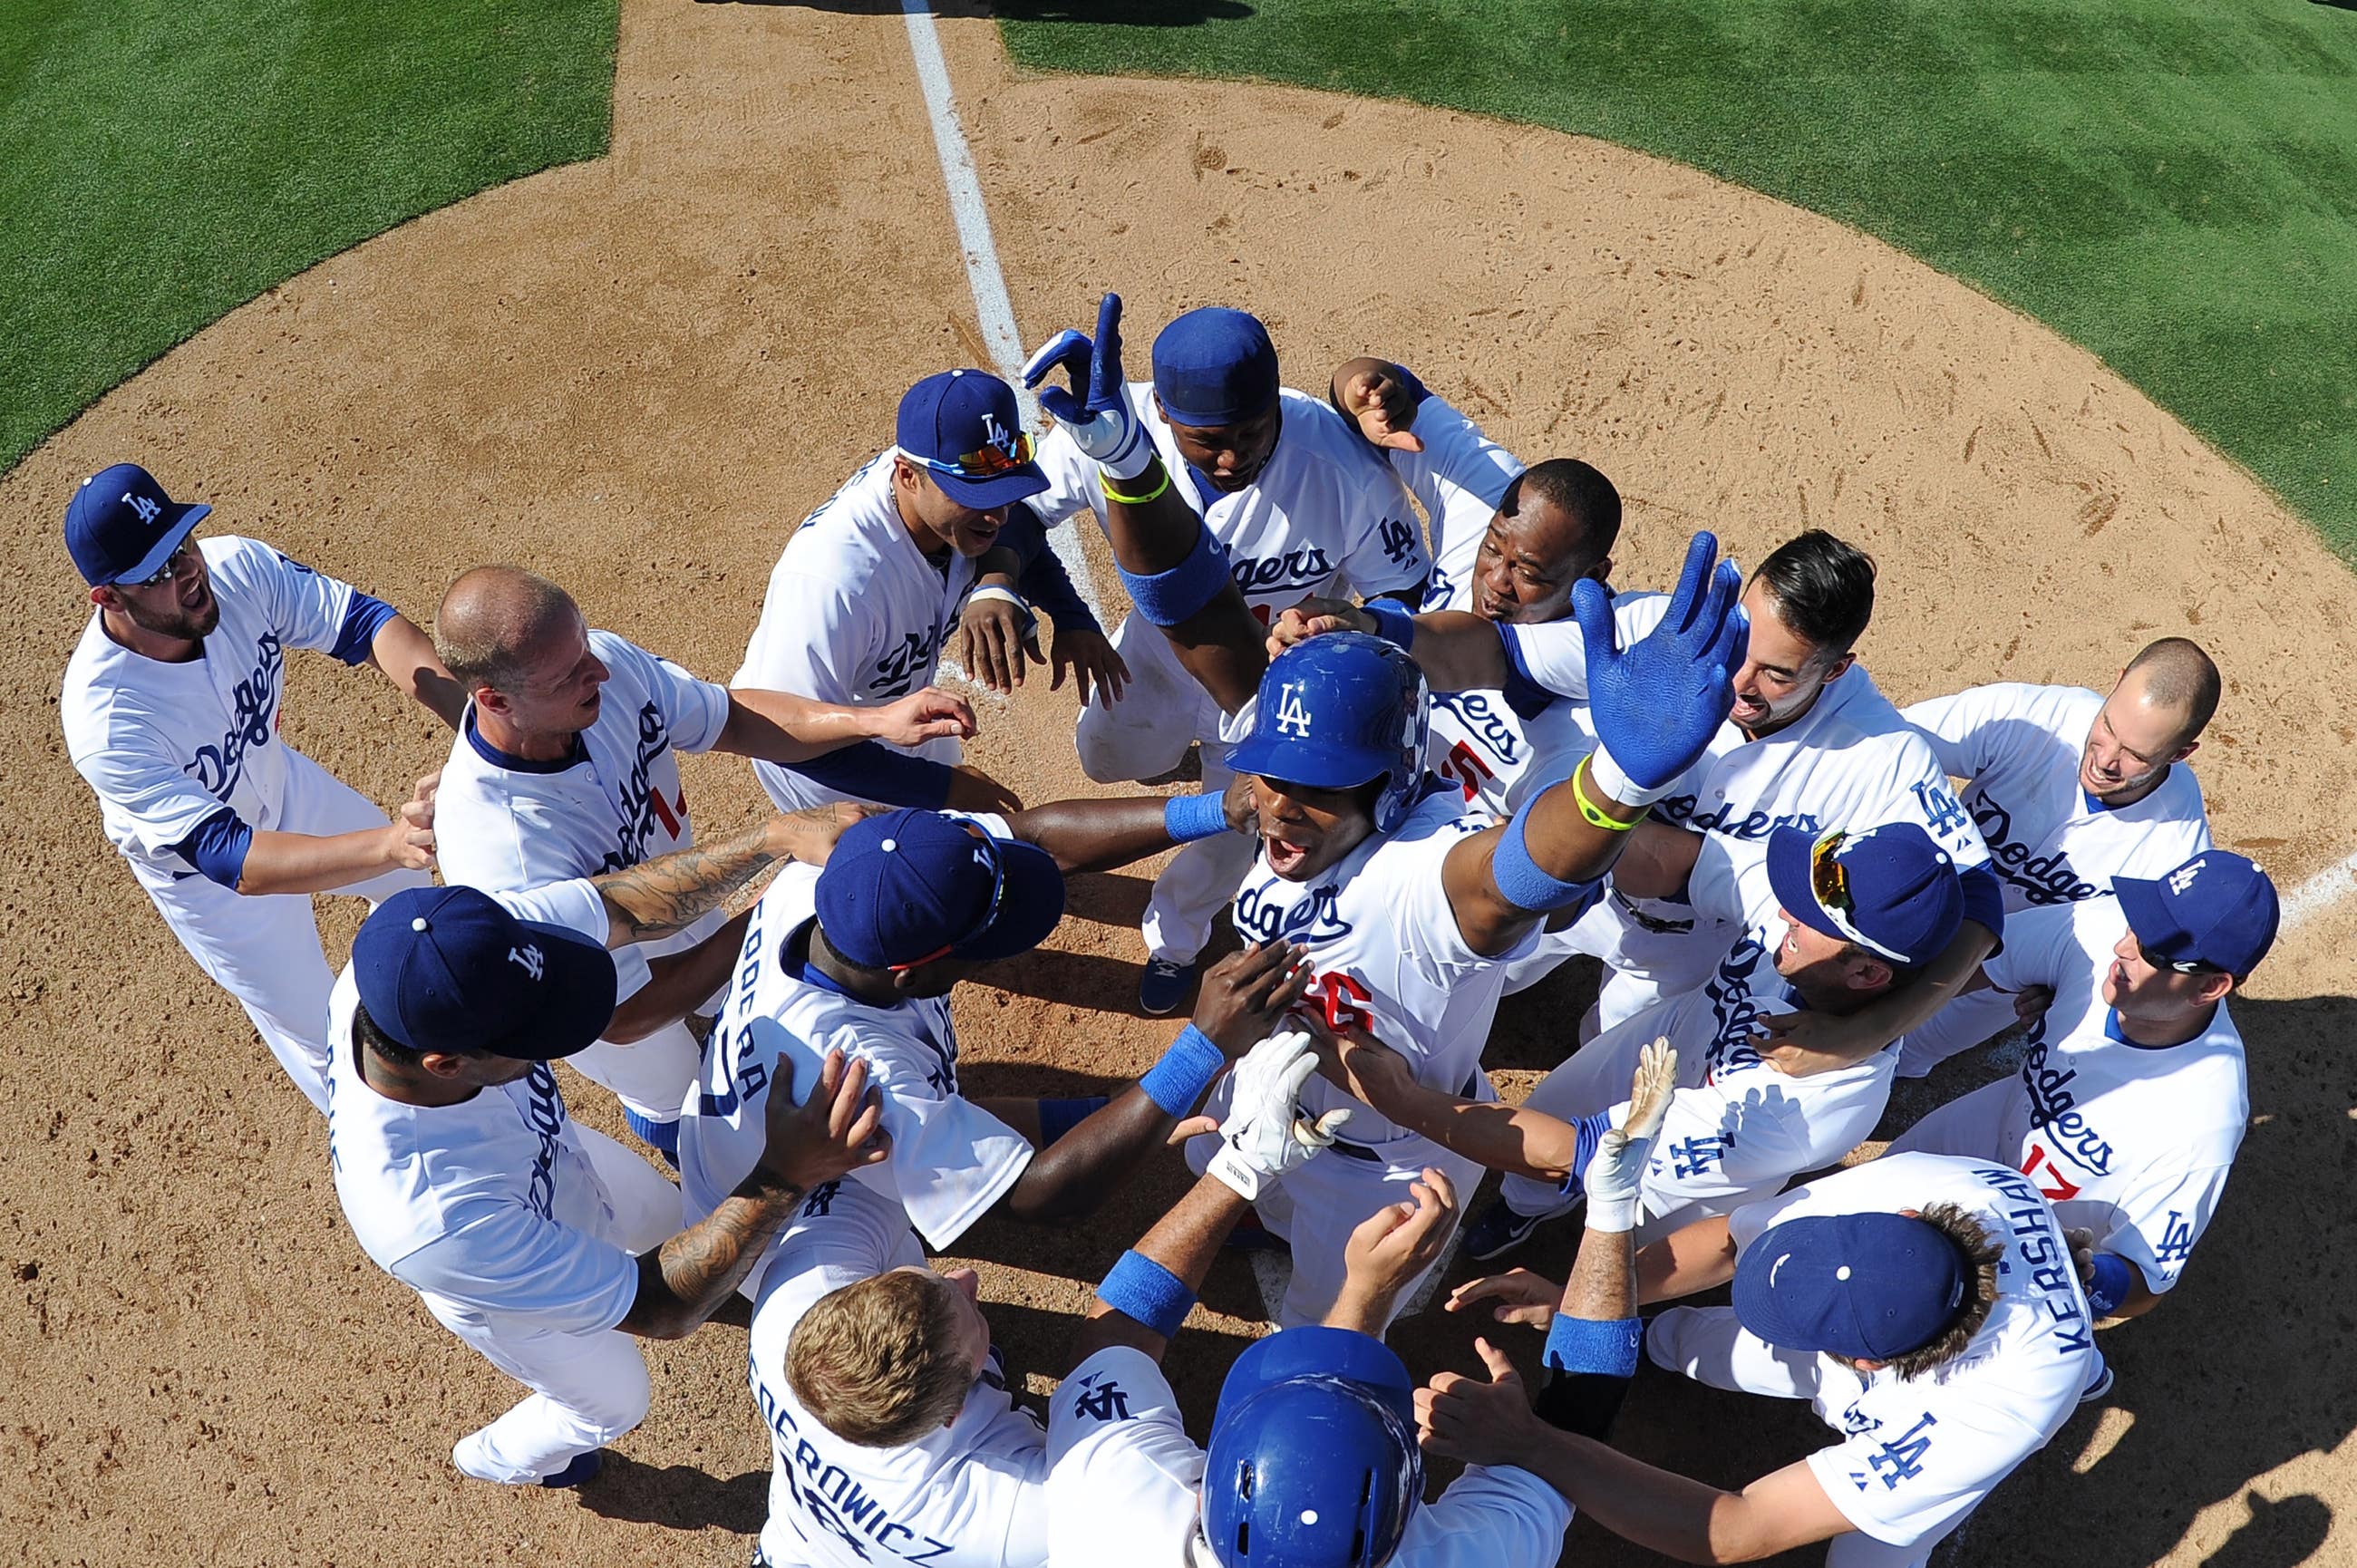 The Dodgers celebrate Yasiel Puig's walk-off home run at Dodger Stadium in 2013